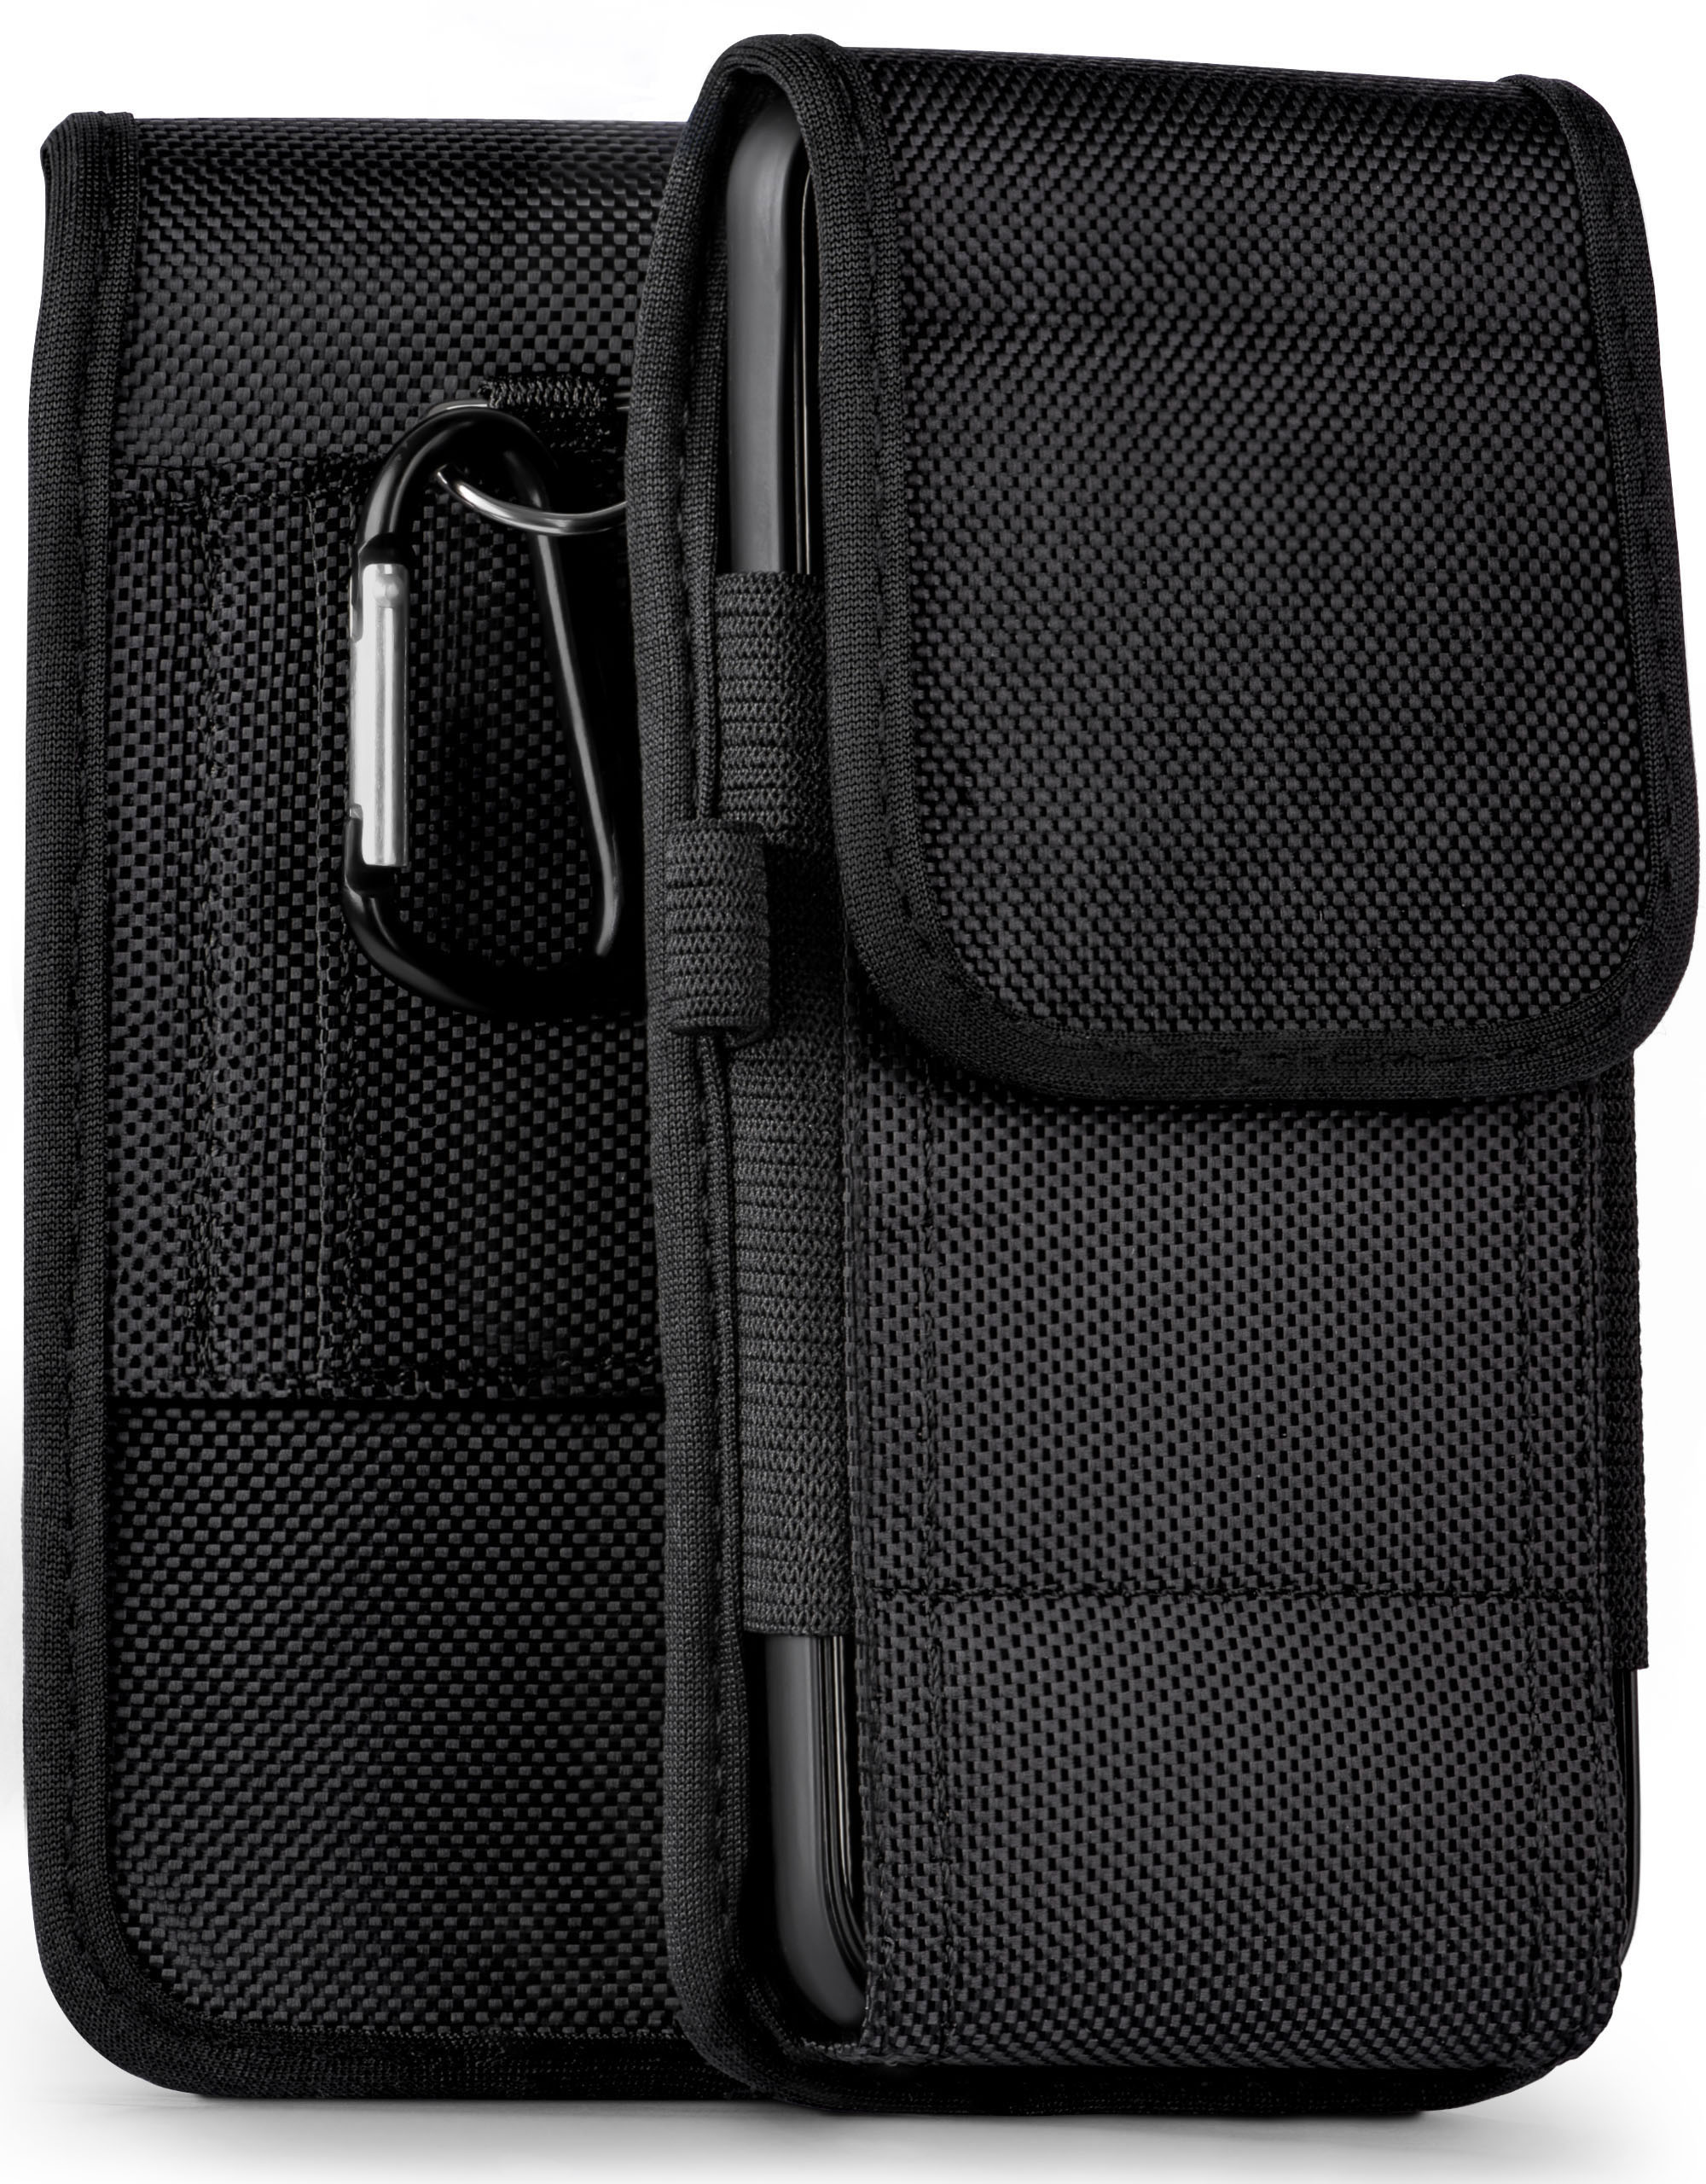 Holster, View3 Pro, Case, Wiko, Trail MOEX Agility